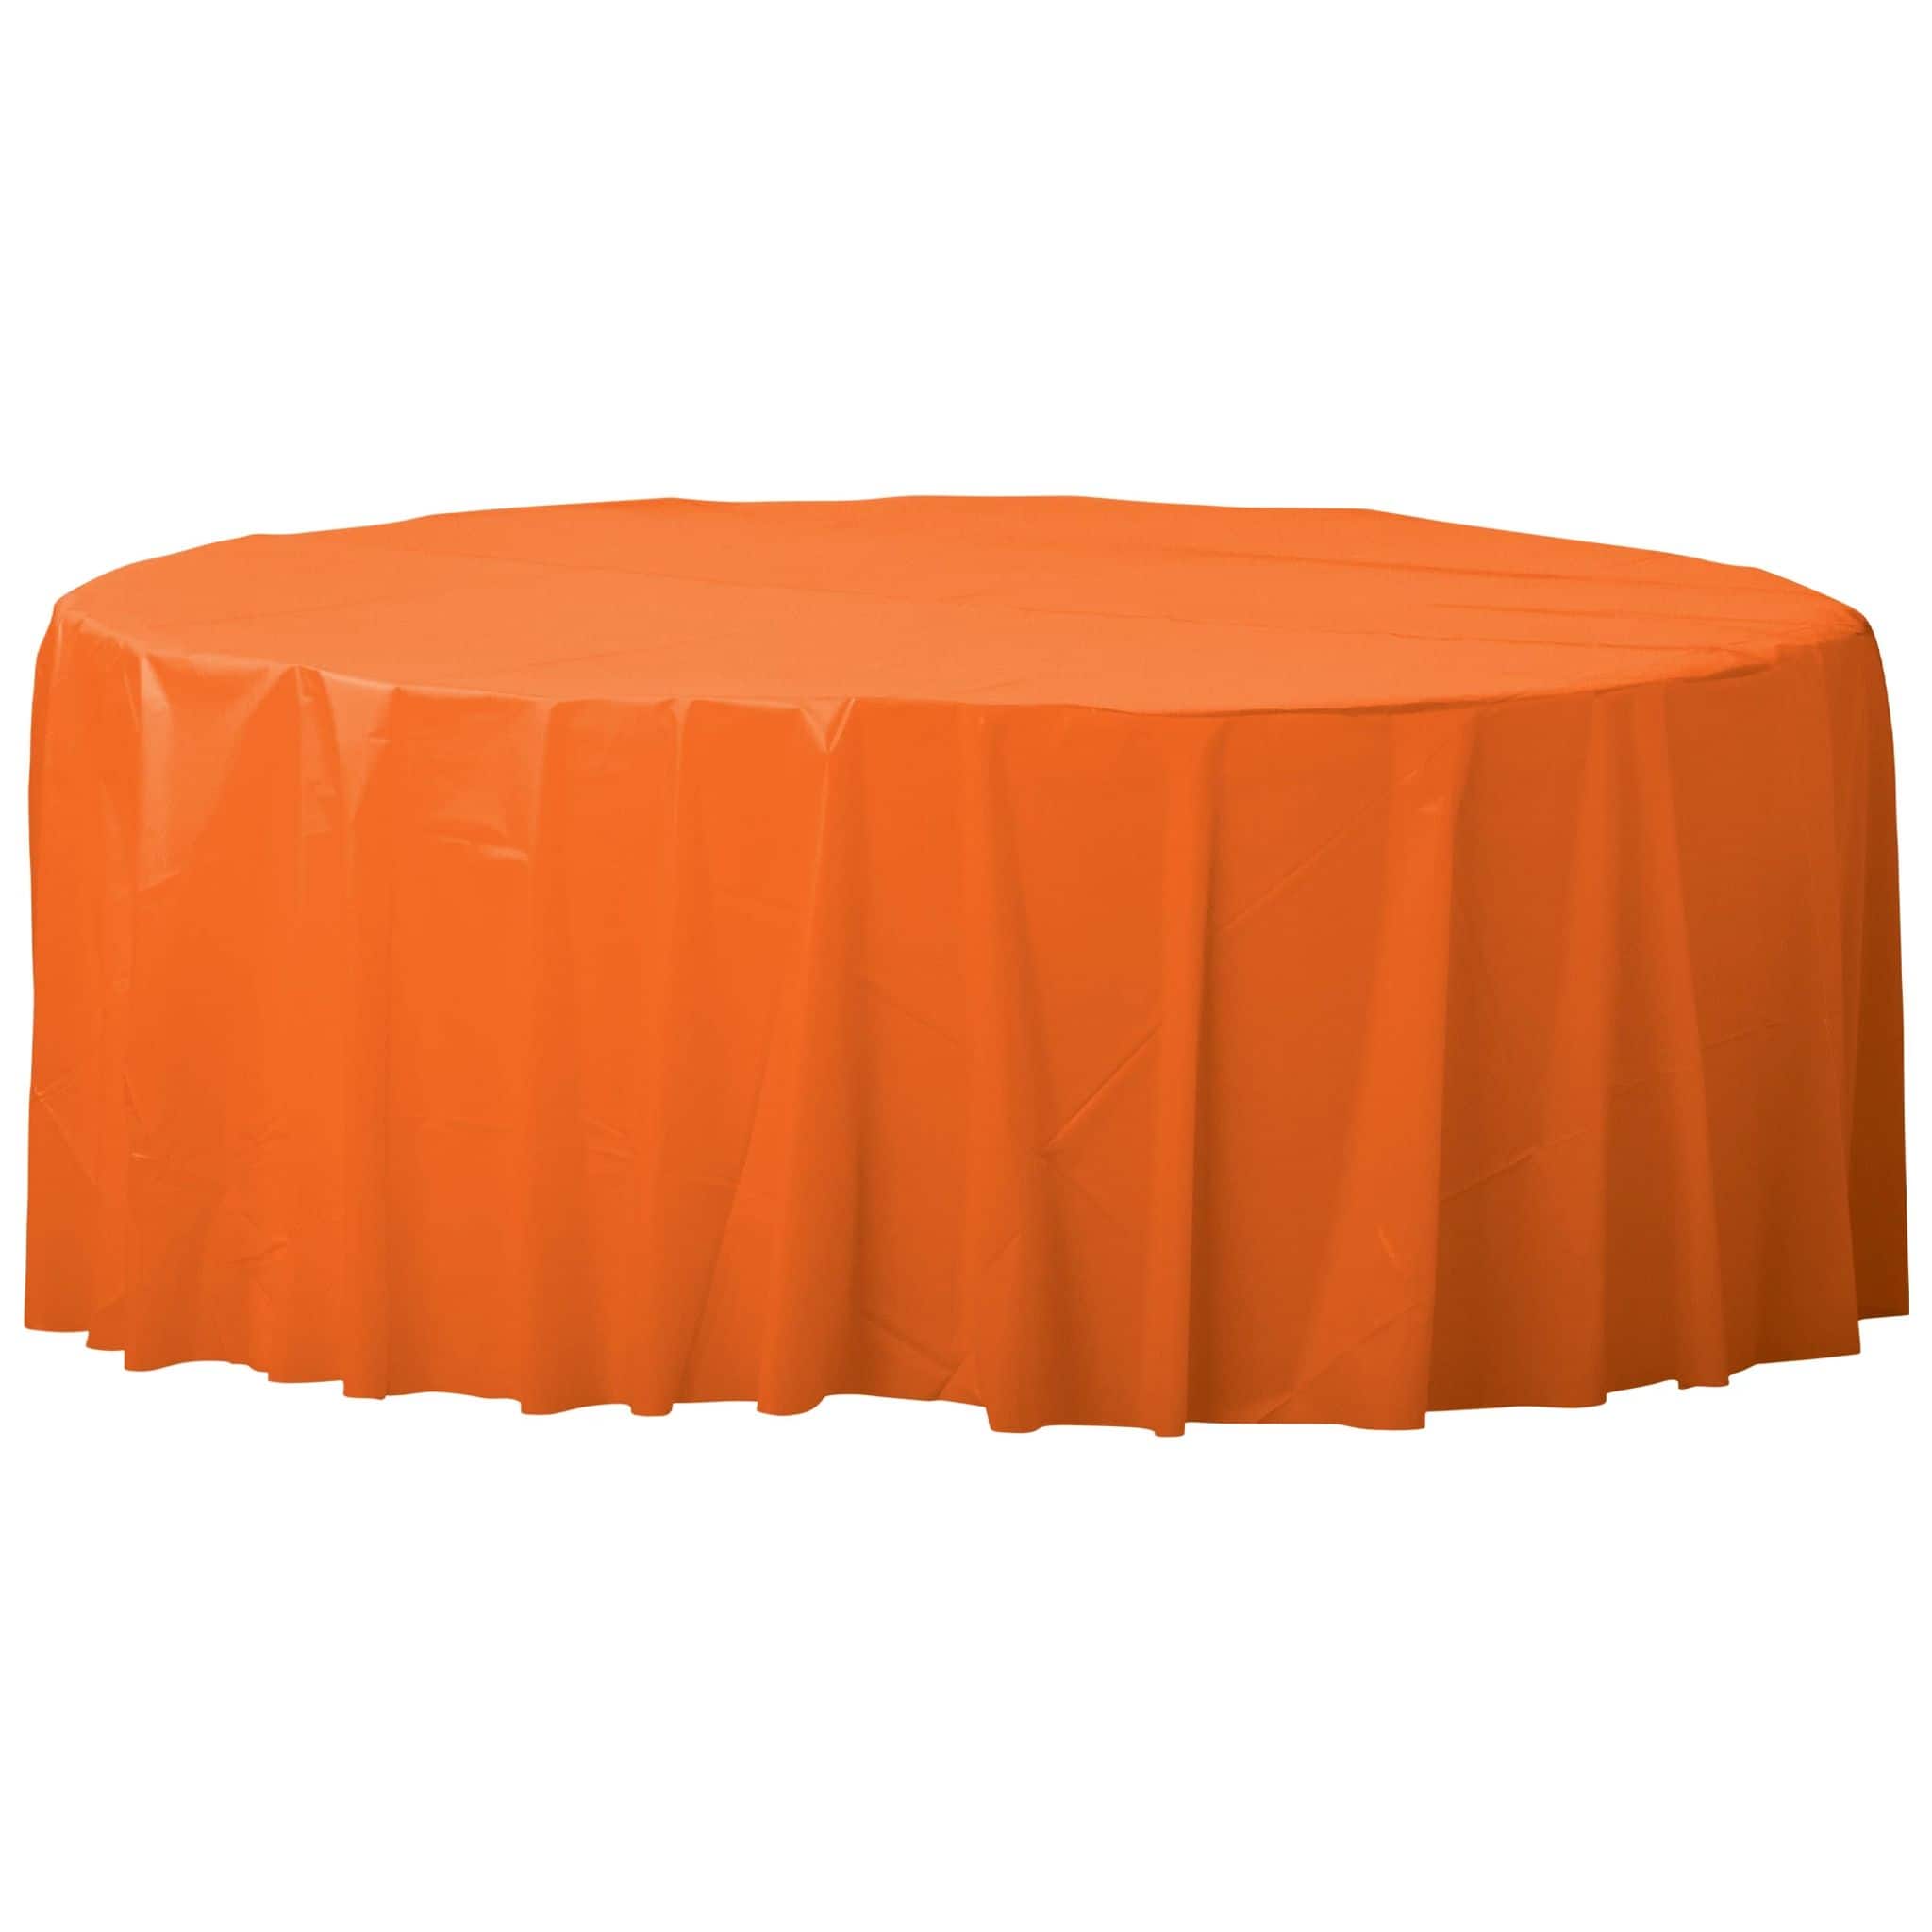 84" Round Plastic Table Cover, 6ct.